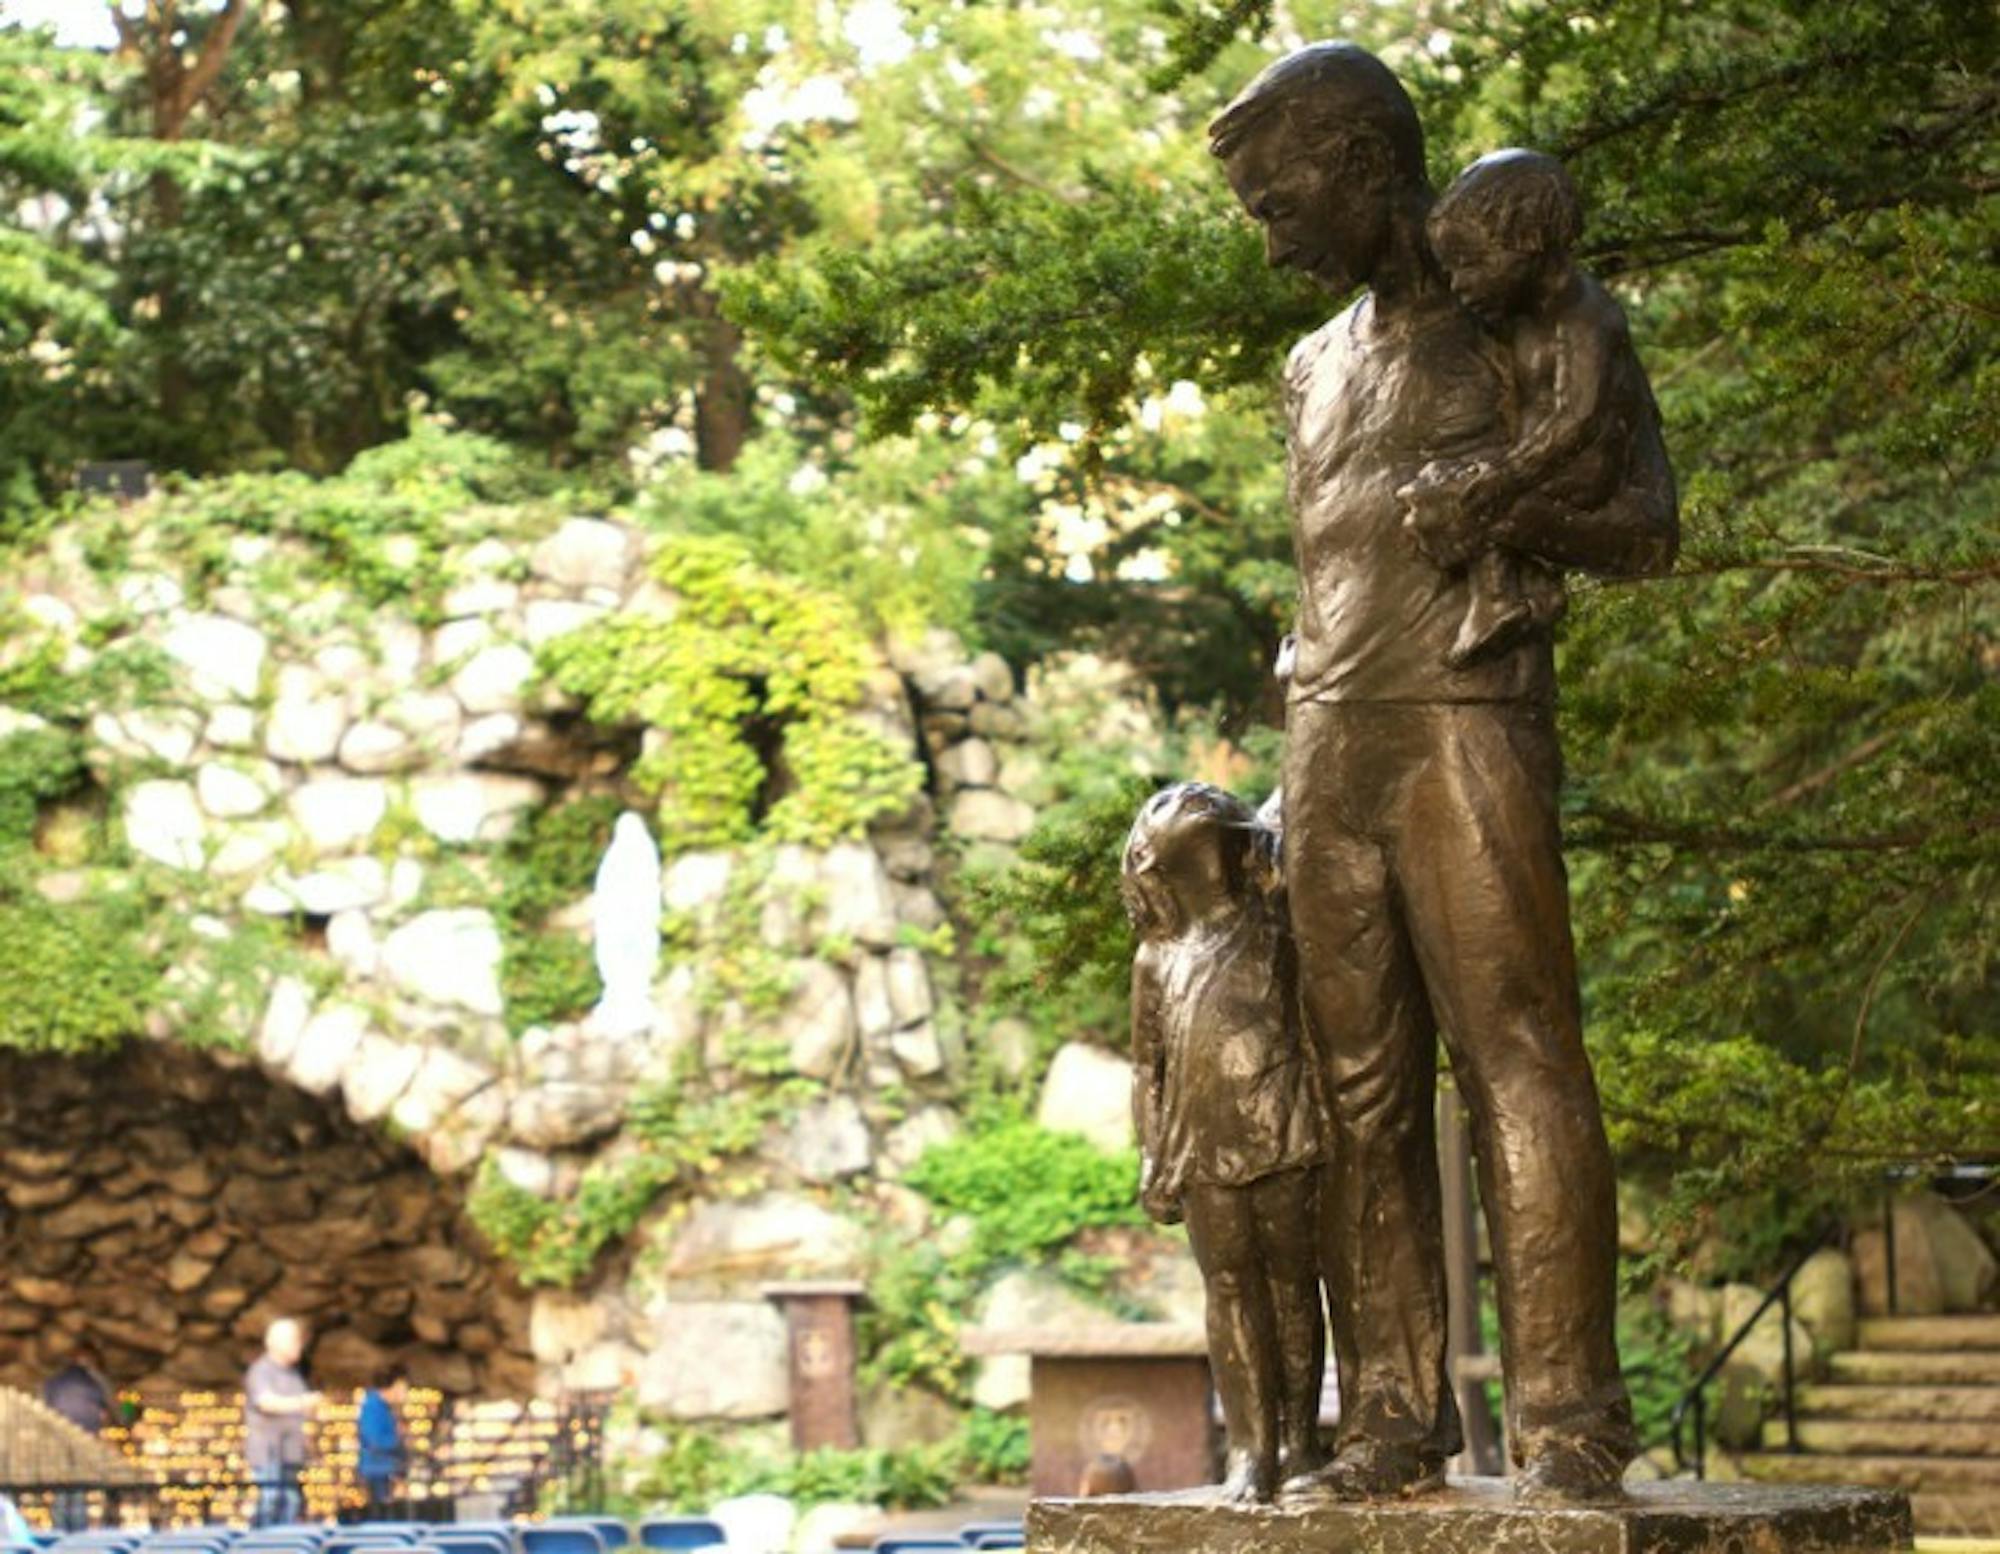 The statue of Dr. Tom Dooley stands against the backdrop of the Grotto. Affixed to the statue is a letter from Dooley to University President Emeritus Fr. Theodore Hesburgh, written more than 50 years ago.